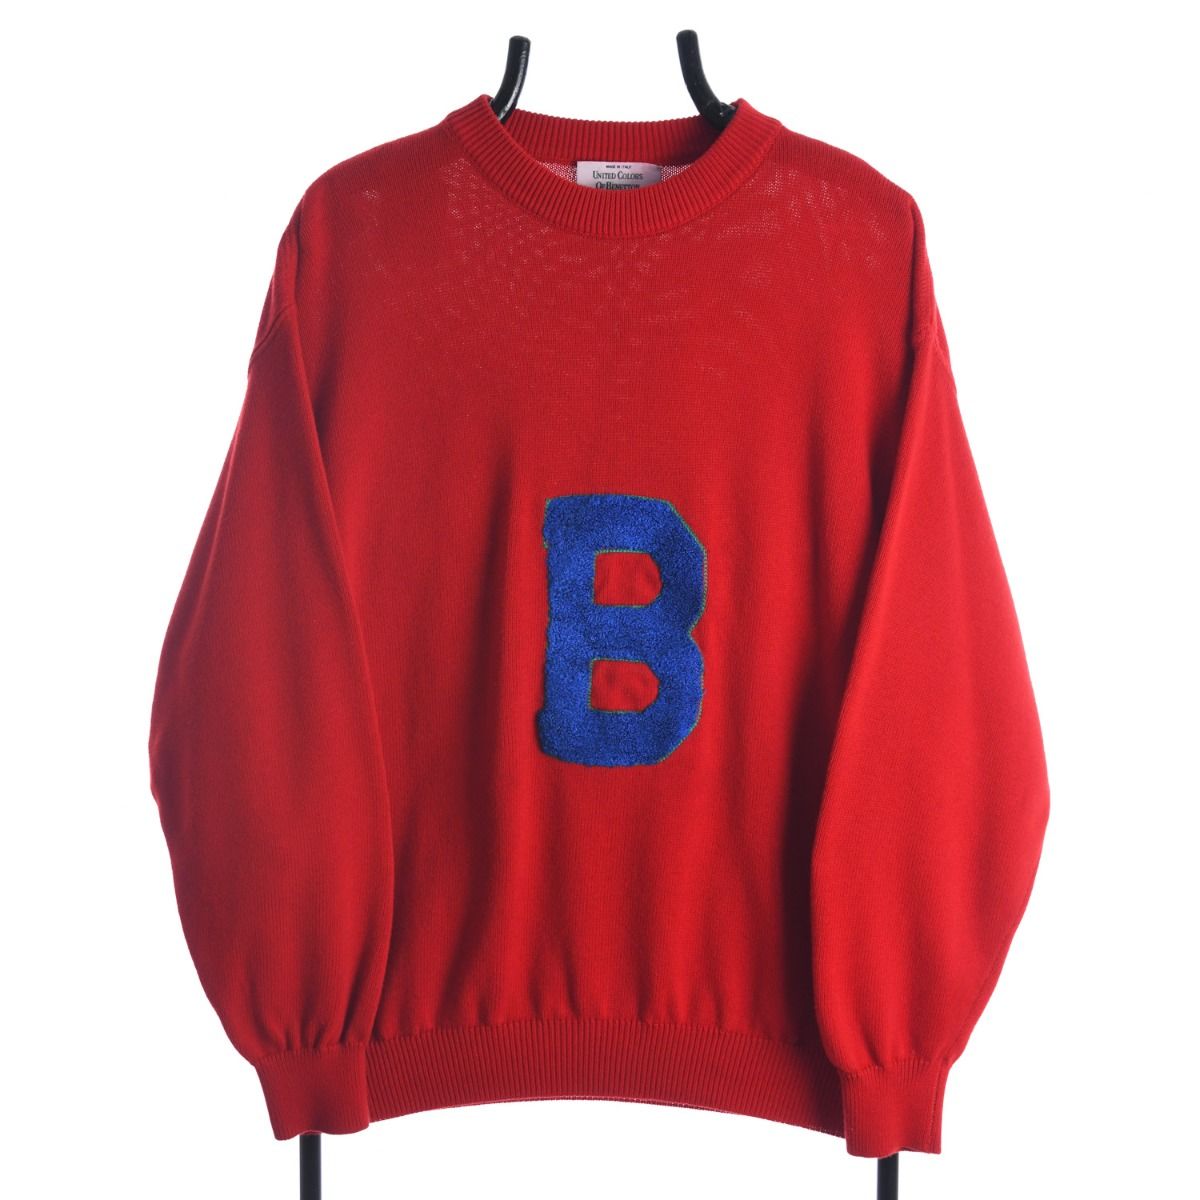 United Colors of Benetton 1990s Jumper